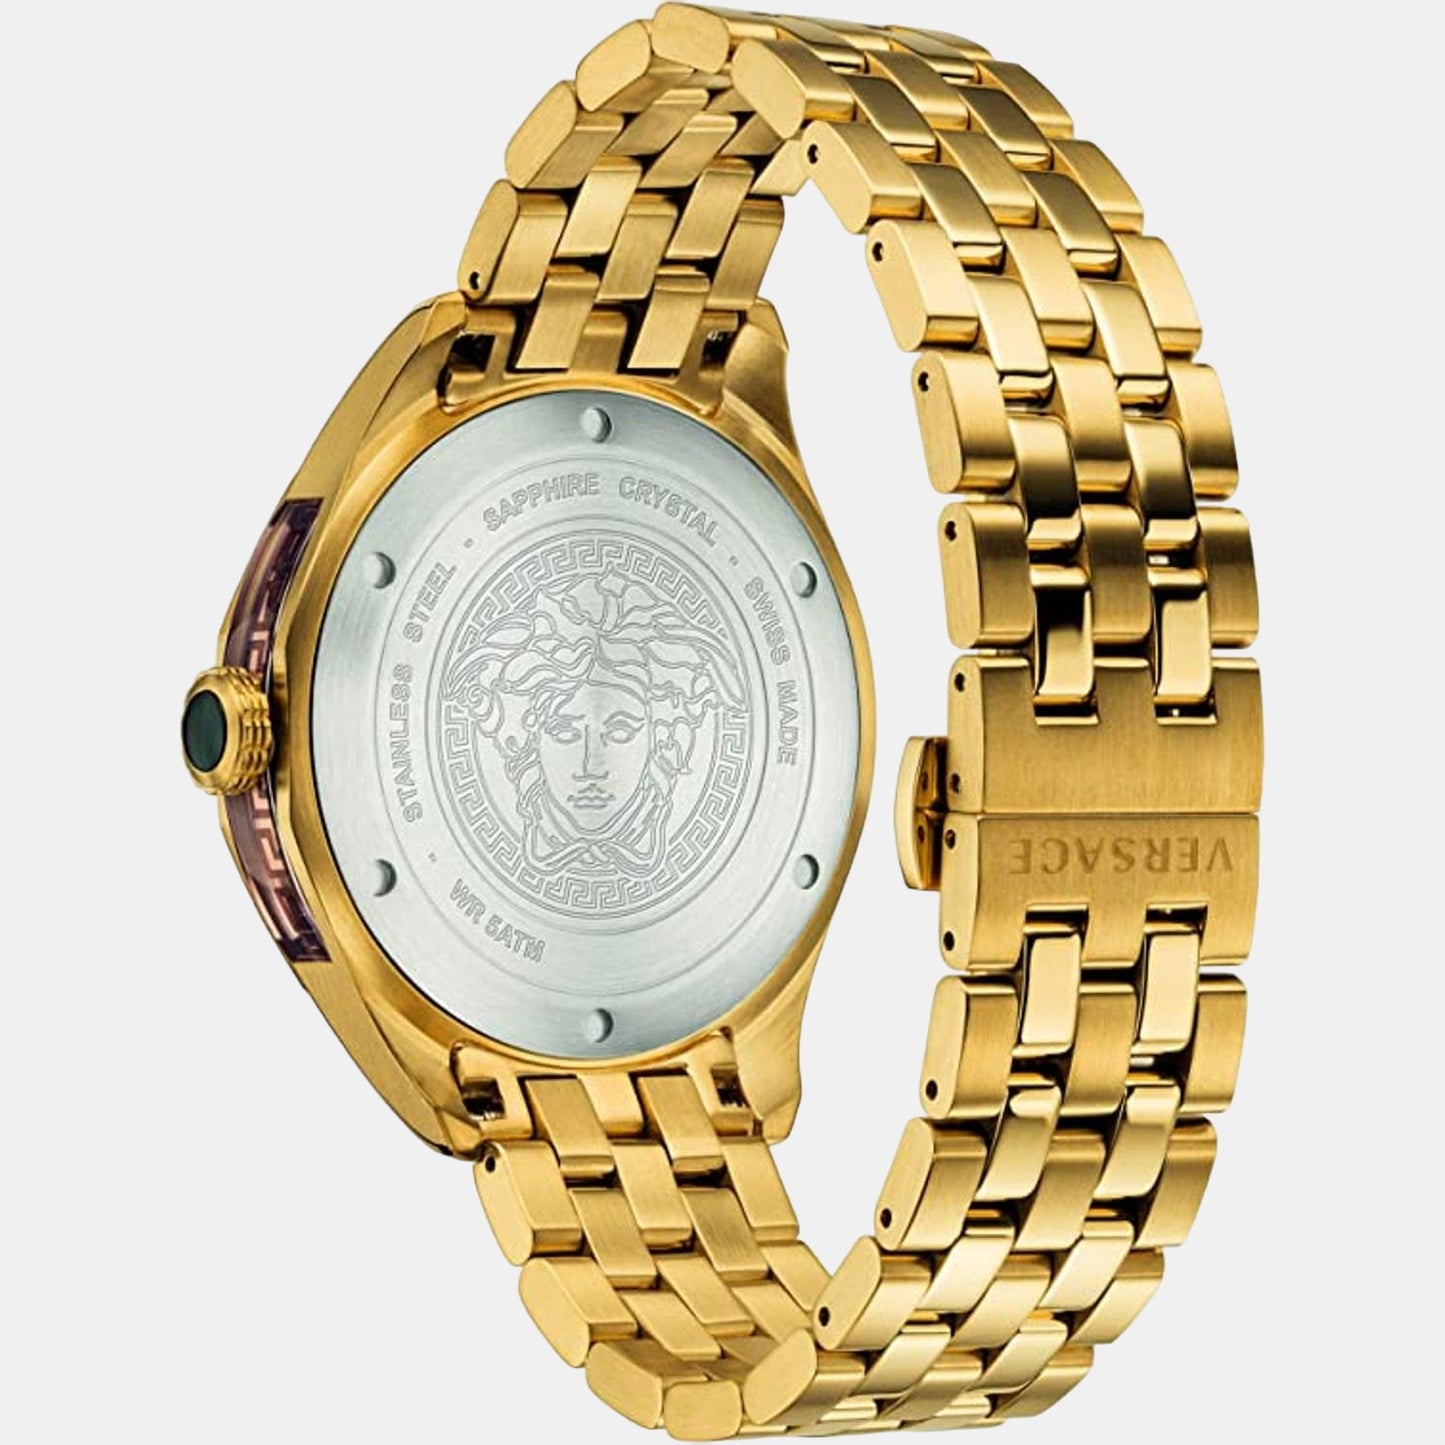 versace-stainless-steel-white-gold-analog-male-watch-vera00618